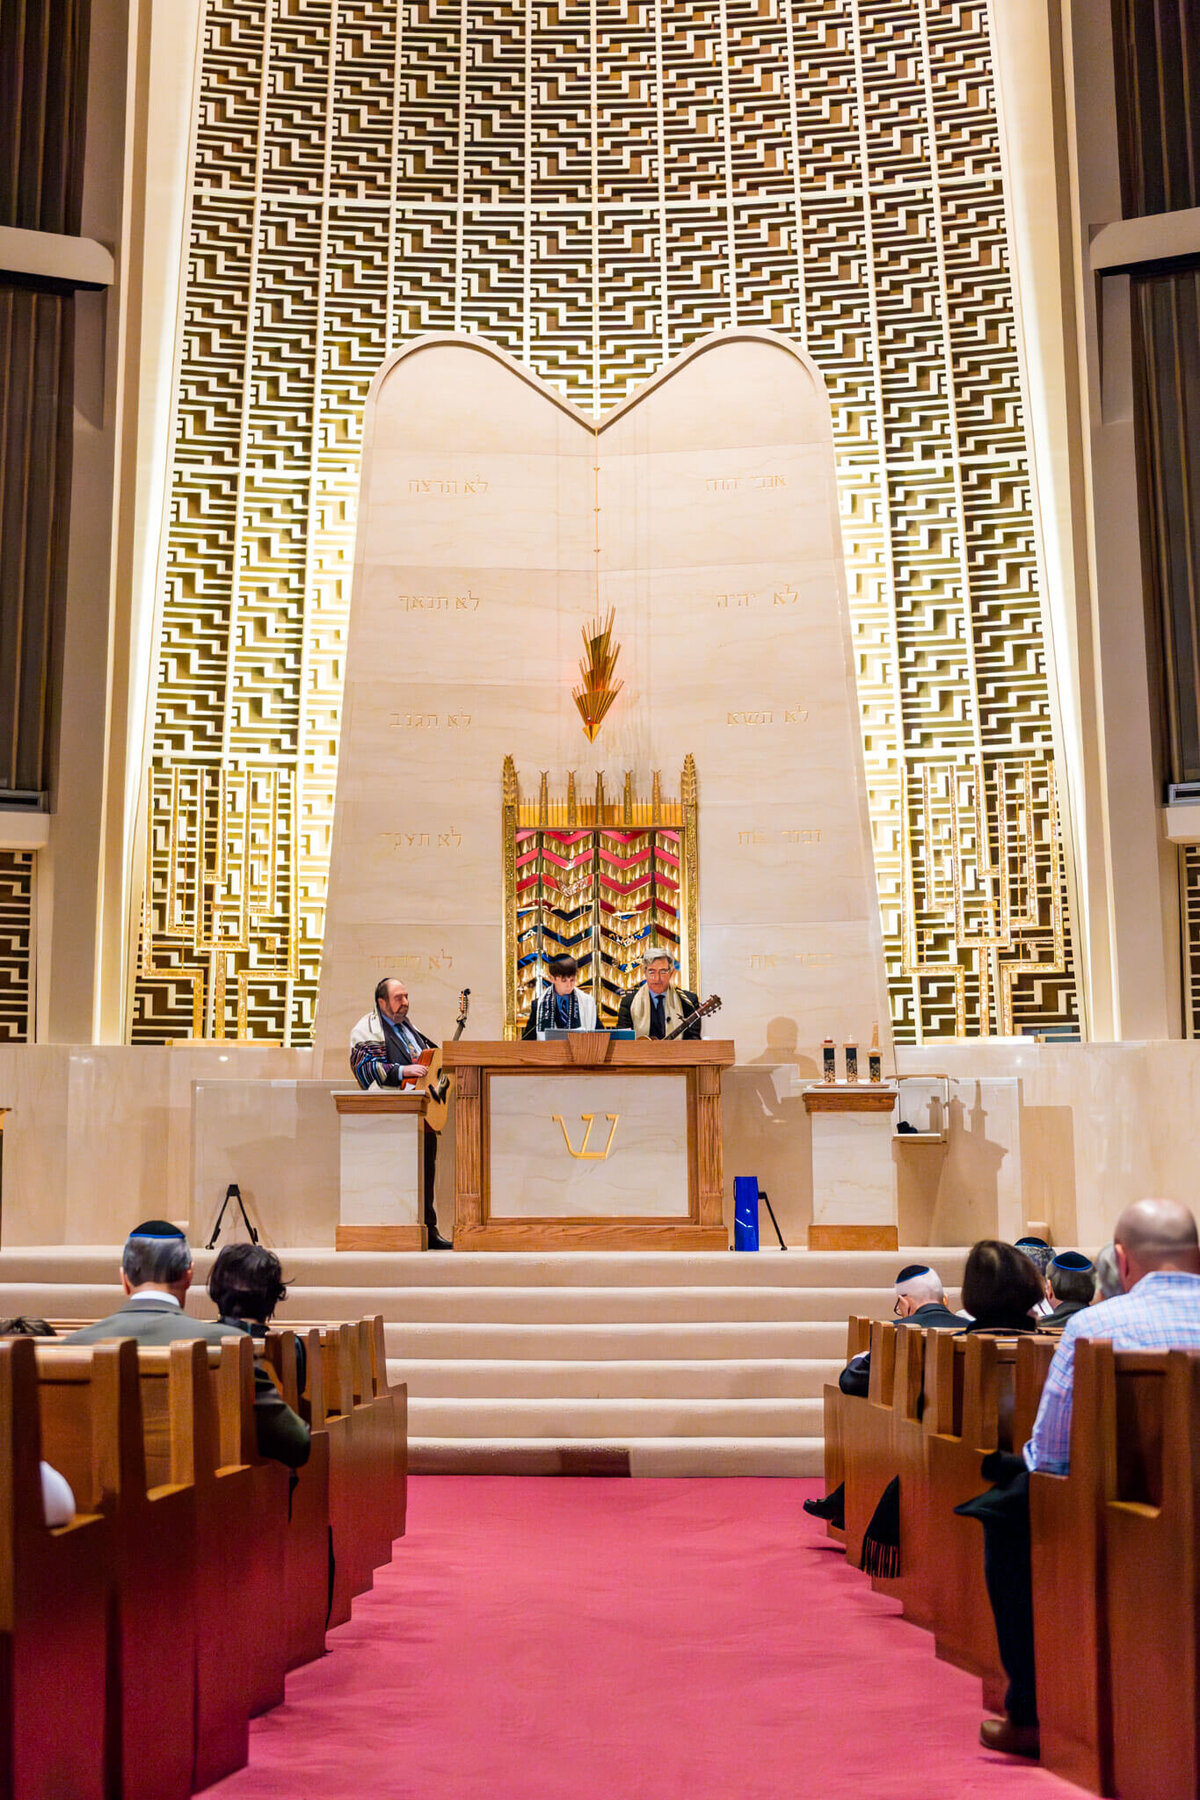 A boy reads from the torah at the bimah during his bar mitzvah